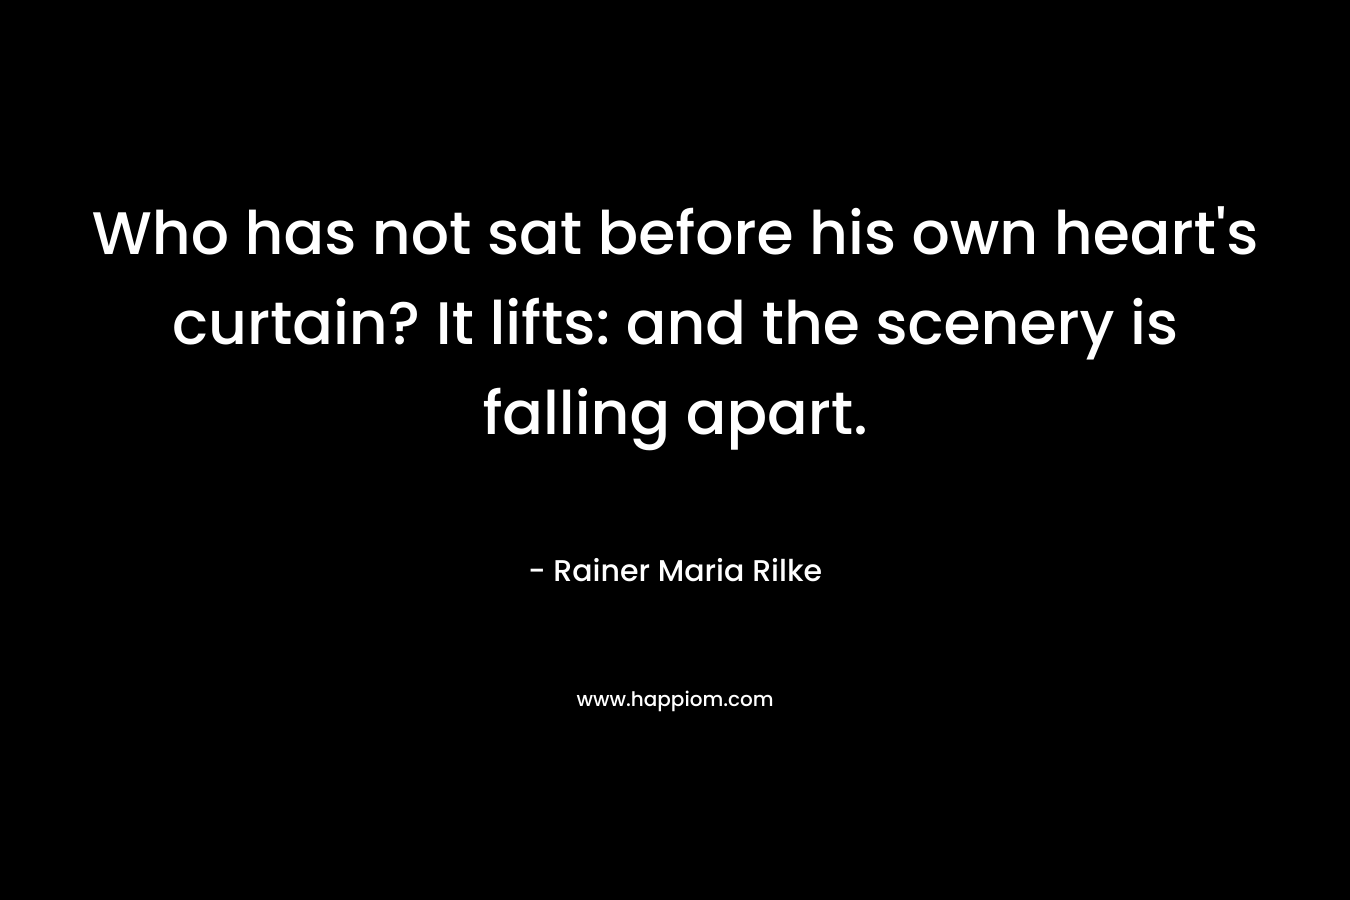 Who has not sat before his own heart’s curtain? It lifts: and the scenery is falling apart. – Rainer Maria Rilke